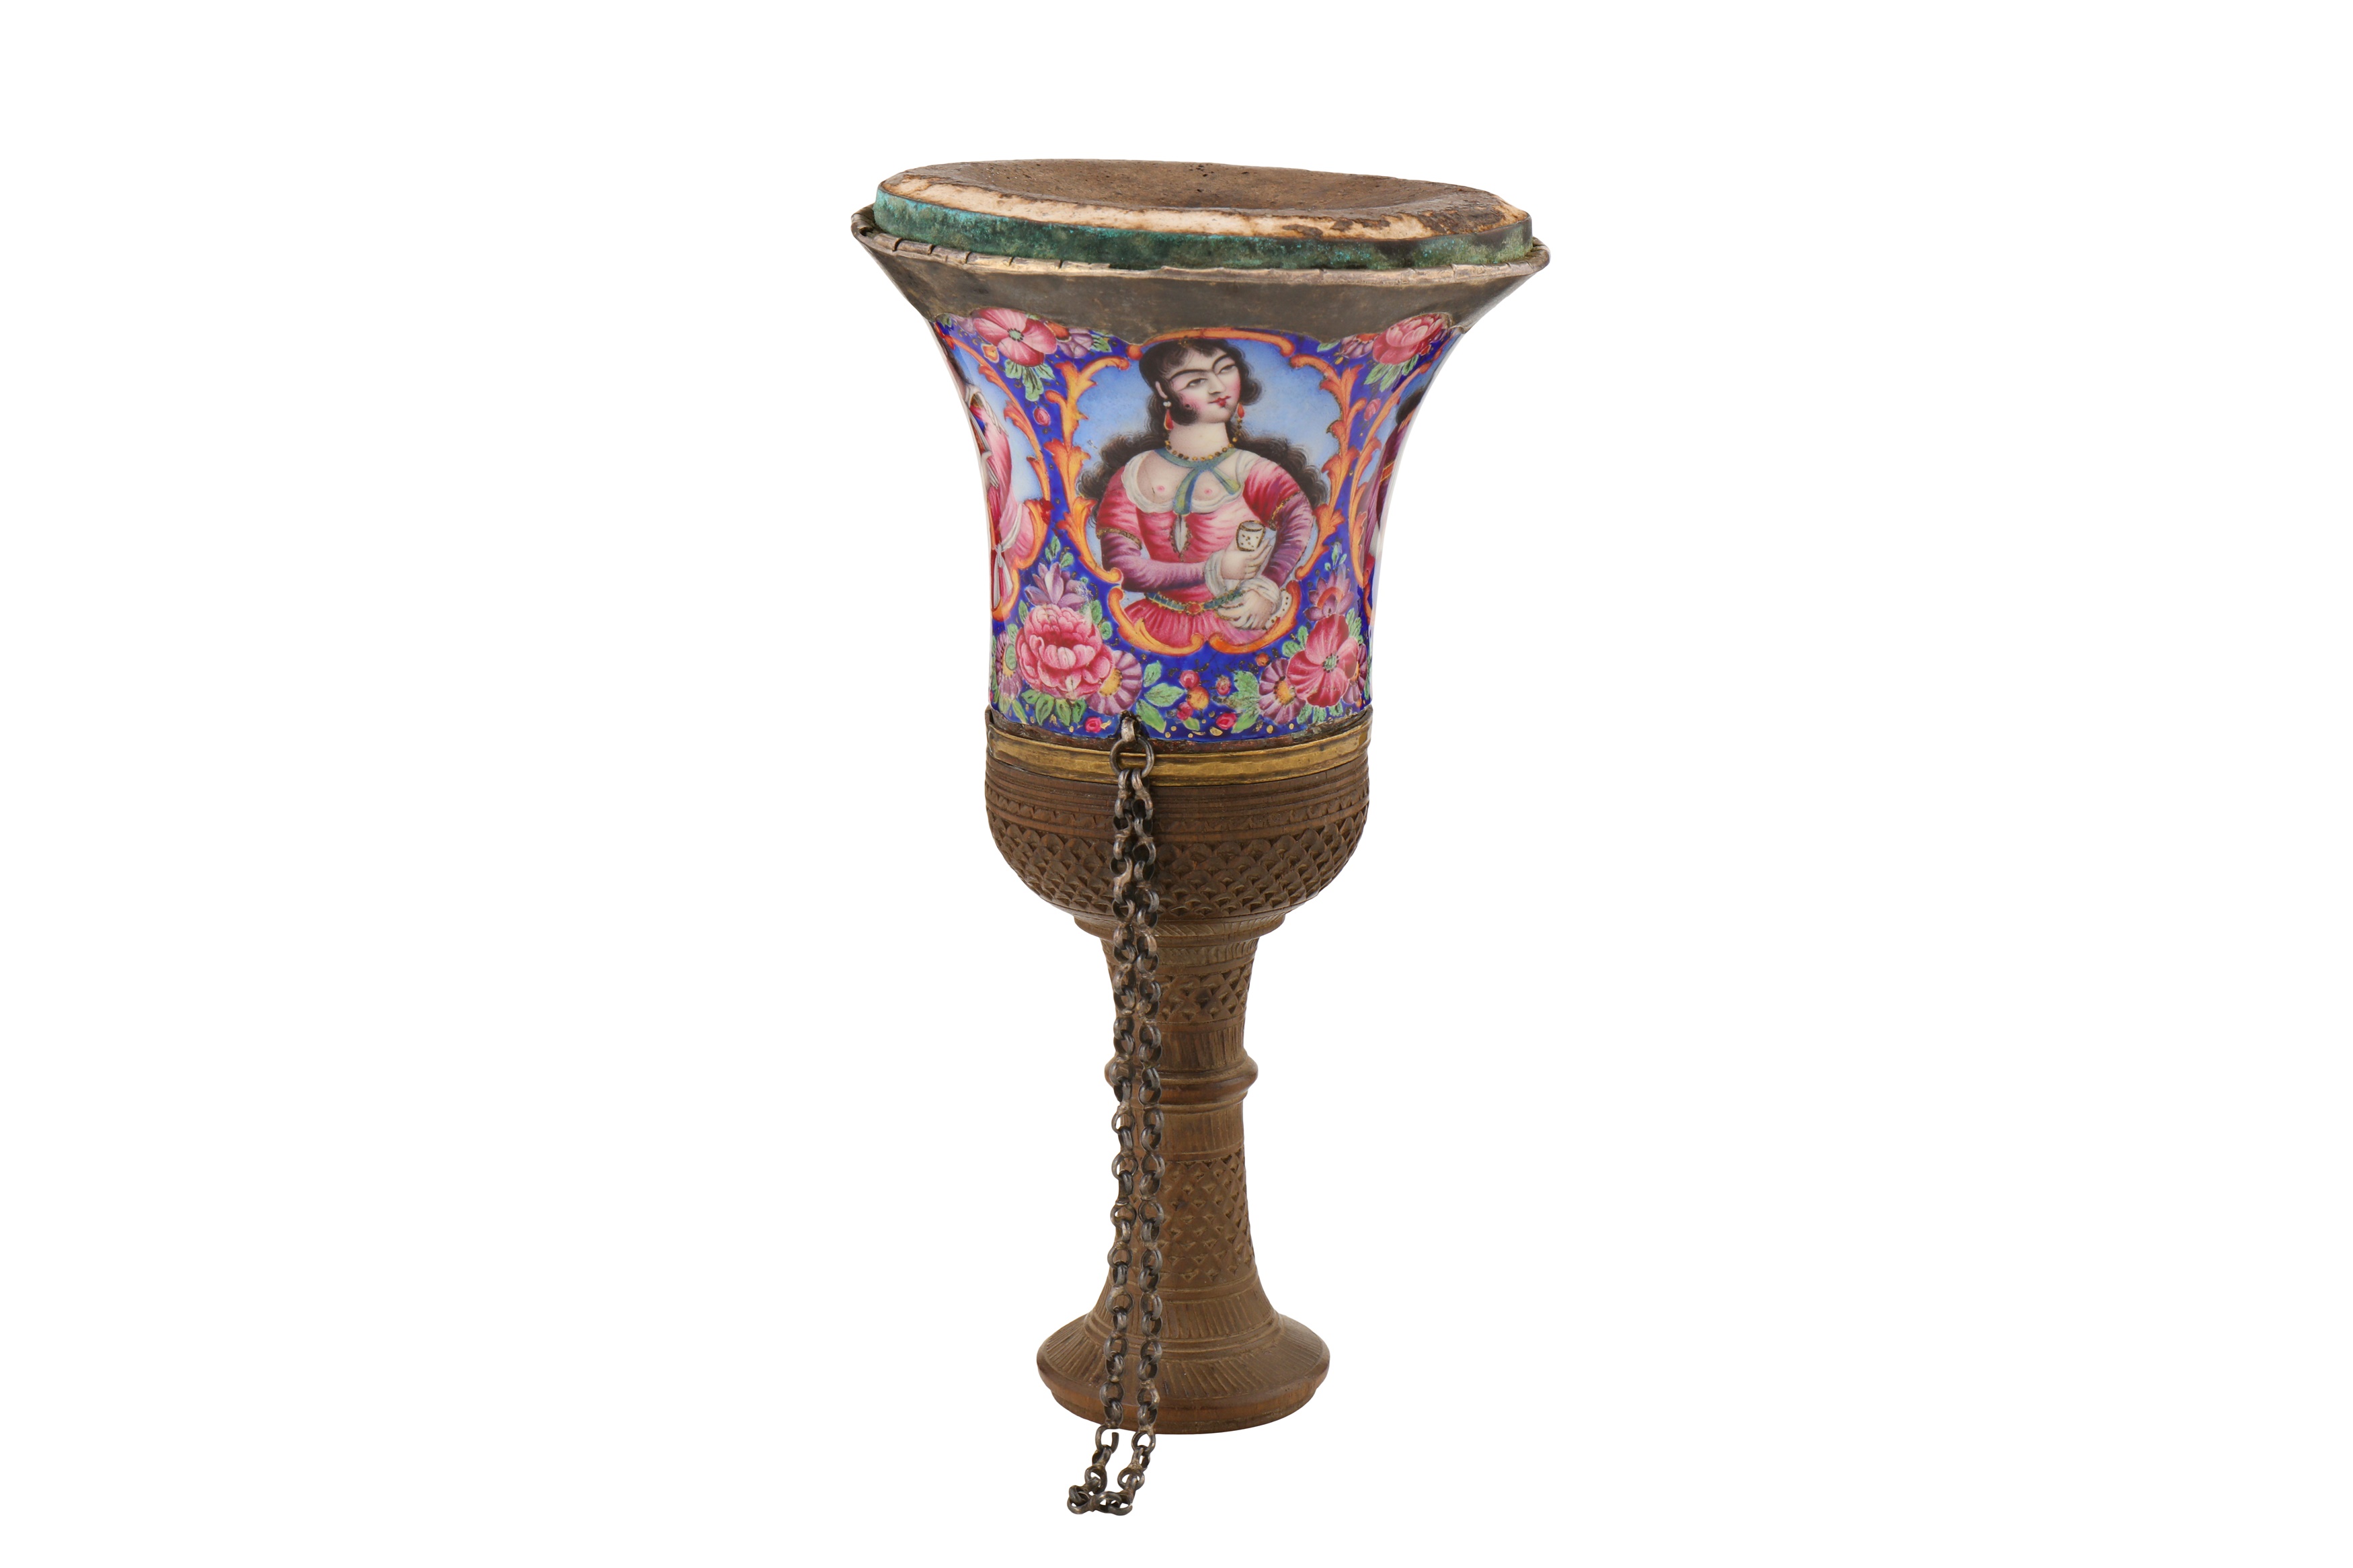 A 19TH CENTURY PERSIAN QAJAR ENAMELLED COPPER GHALIAN CUP - Image 2 of 4